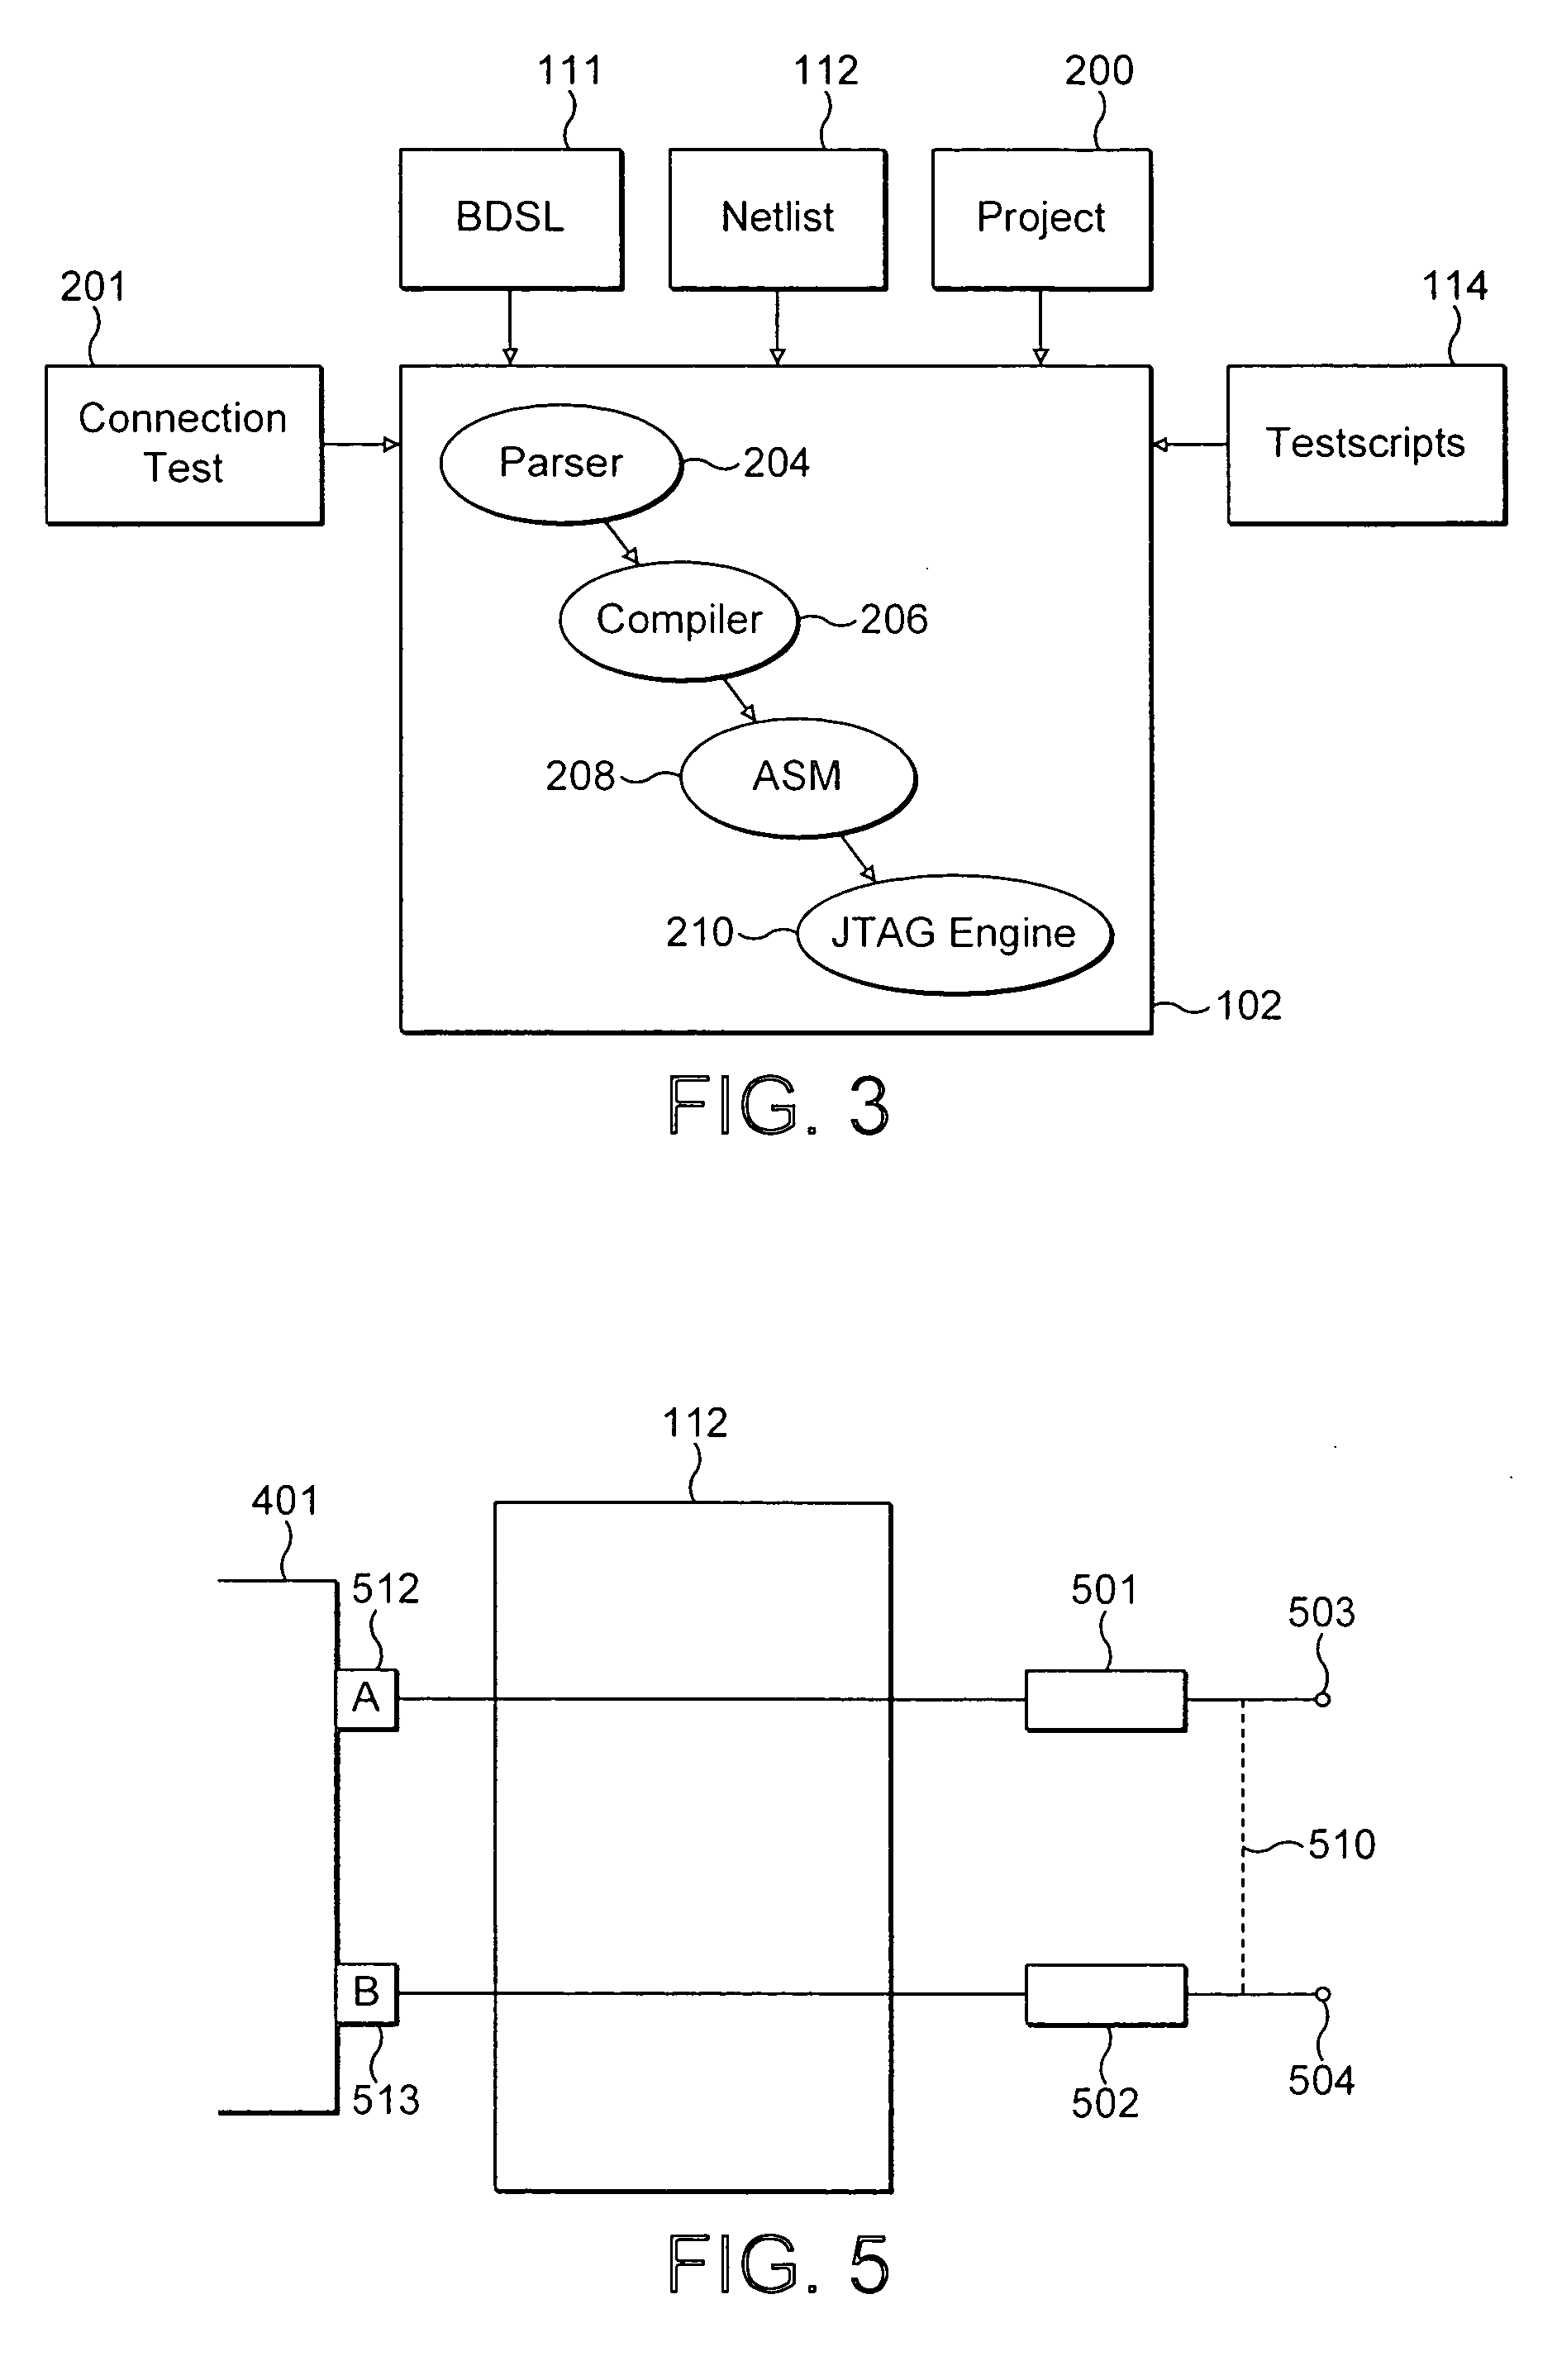 Testing of integrated circuits using boundary scan